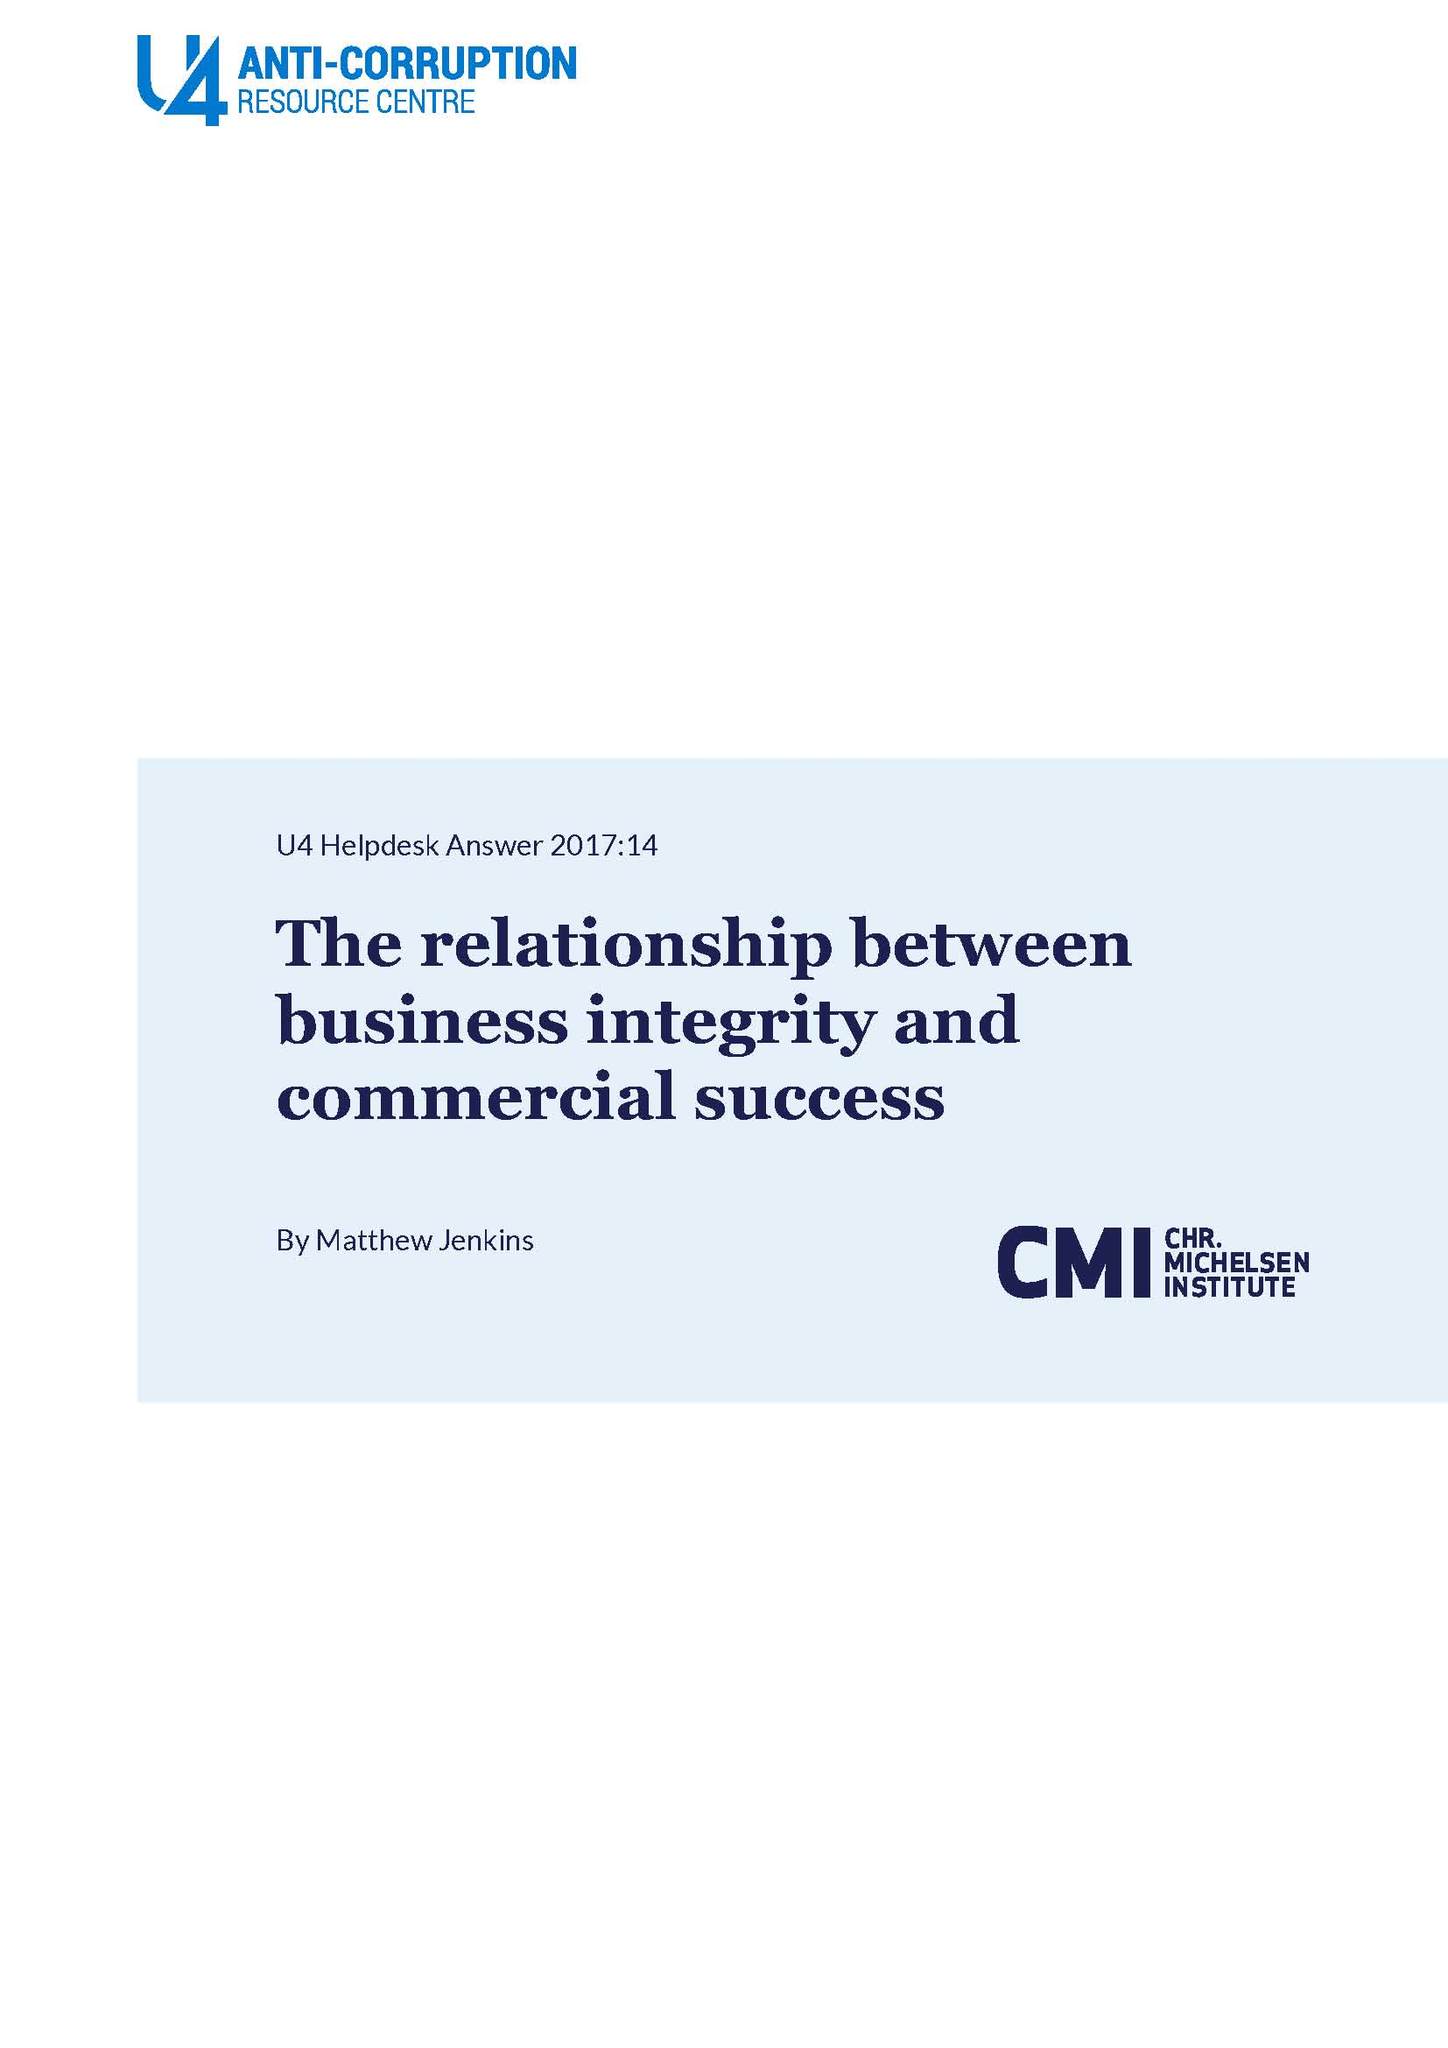 The relationship between business integrity and commercial success